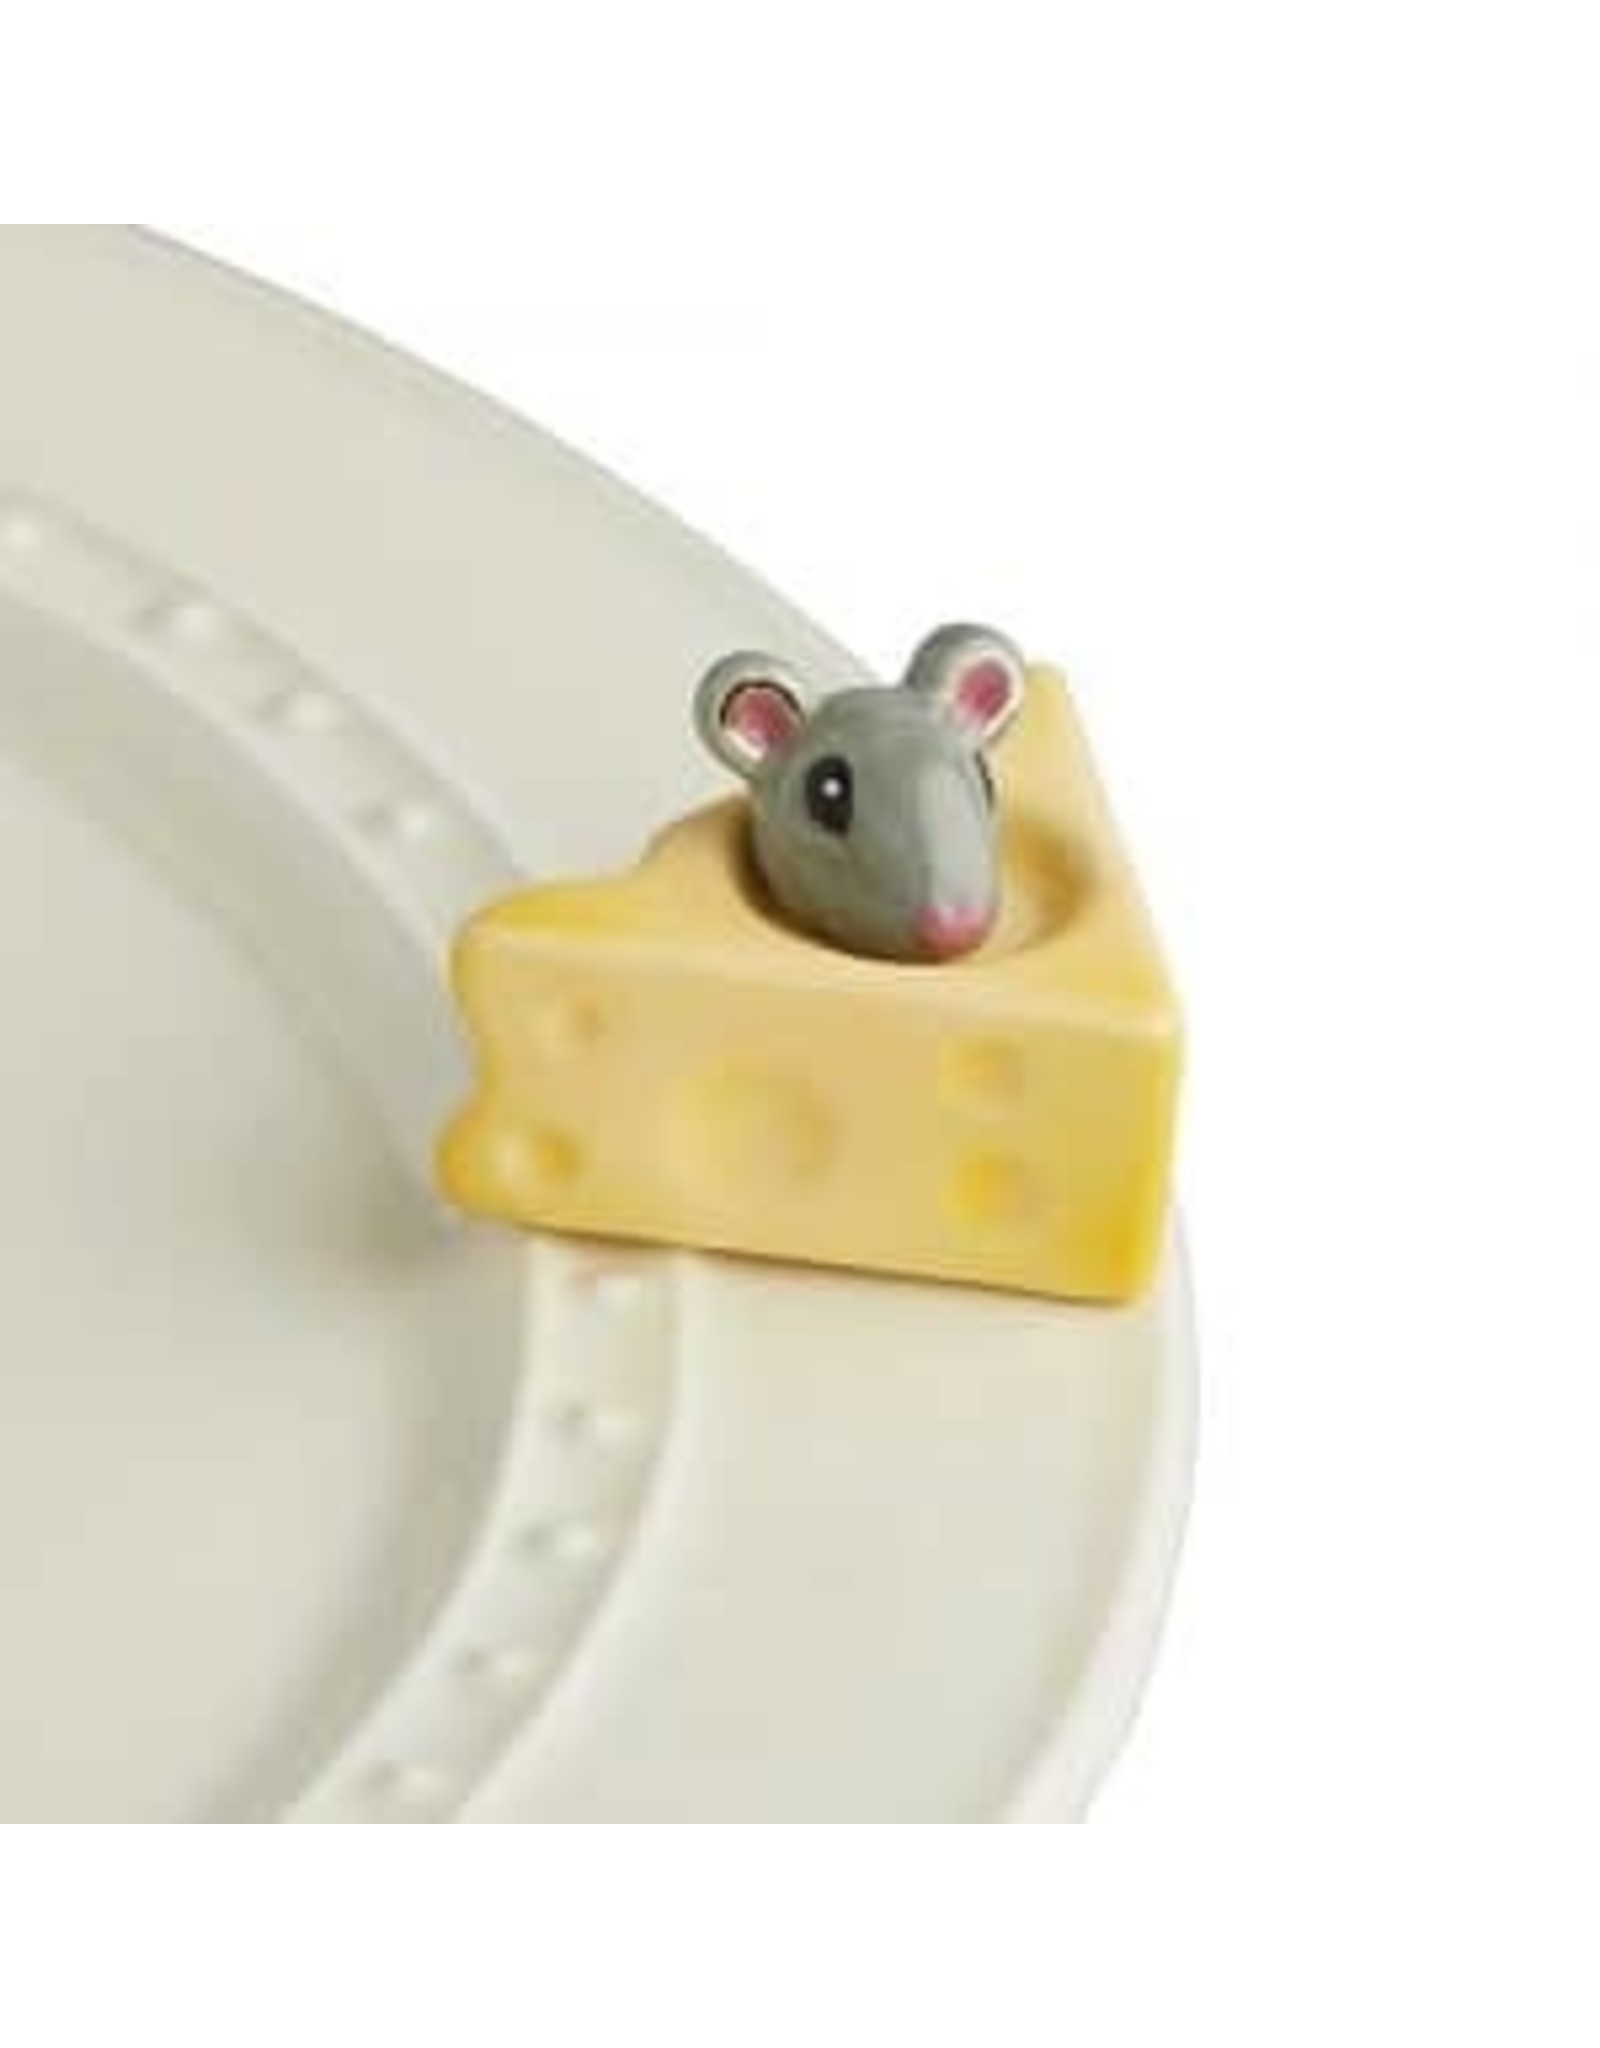 NORA FLEMING MOUSE & CHEESE